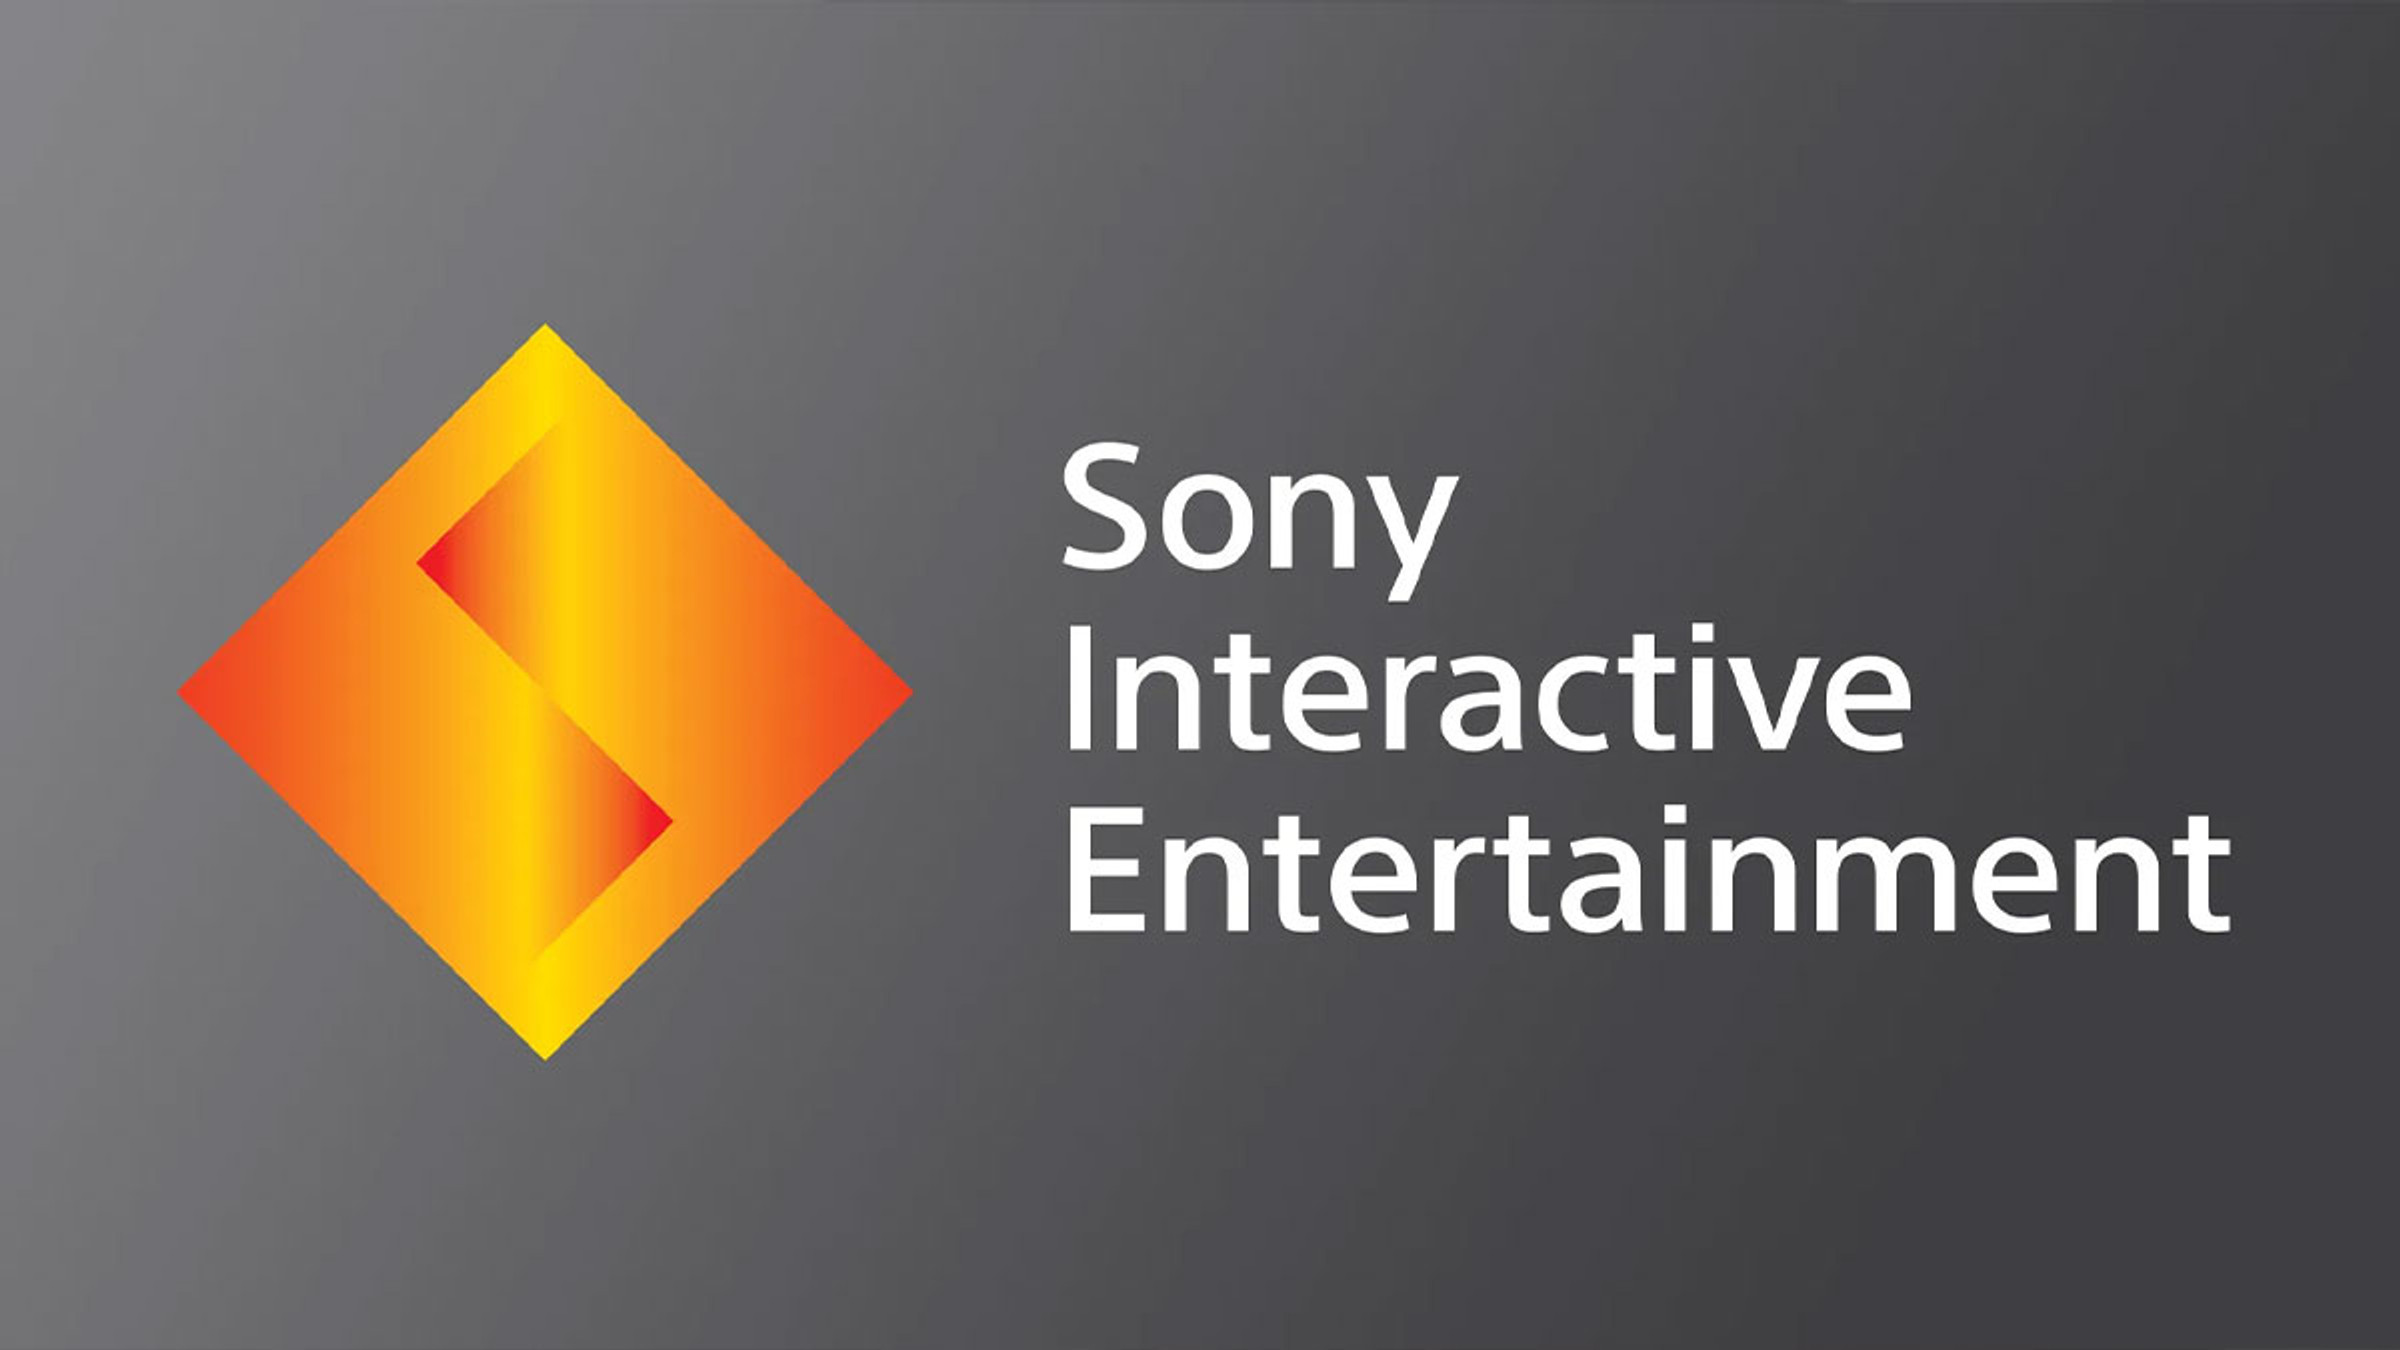 licenciement-900-employes-sony-ps-playstation